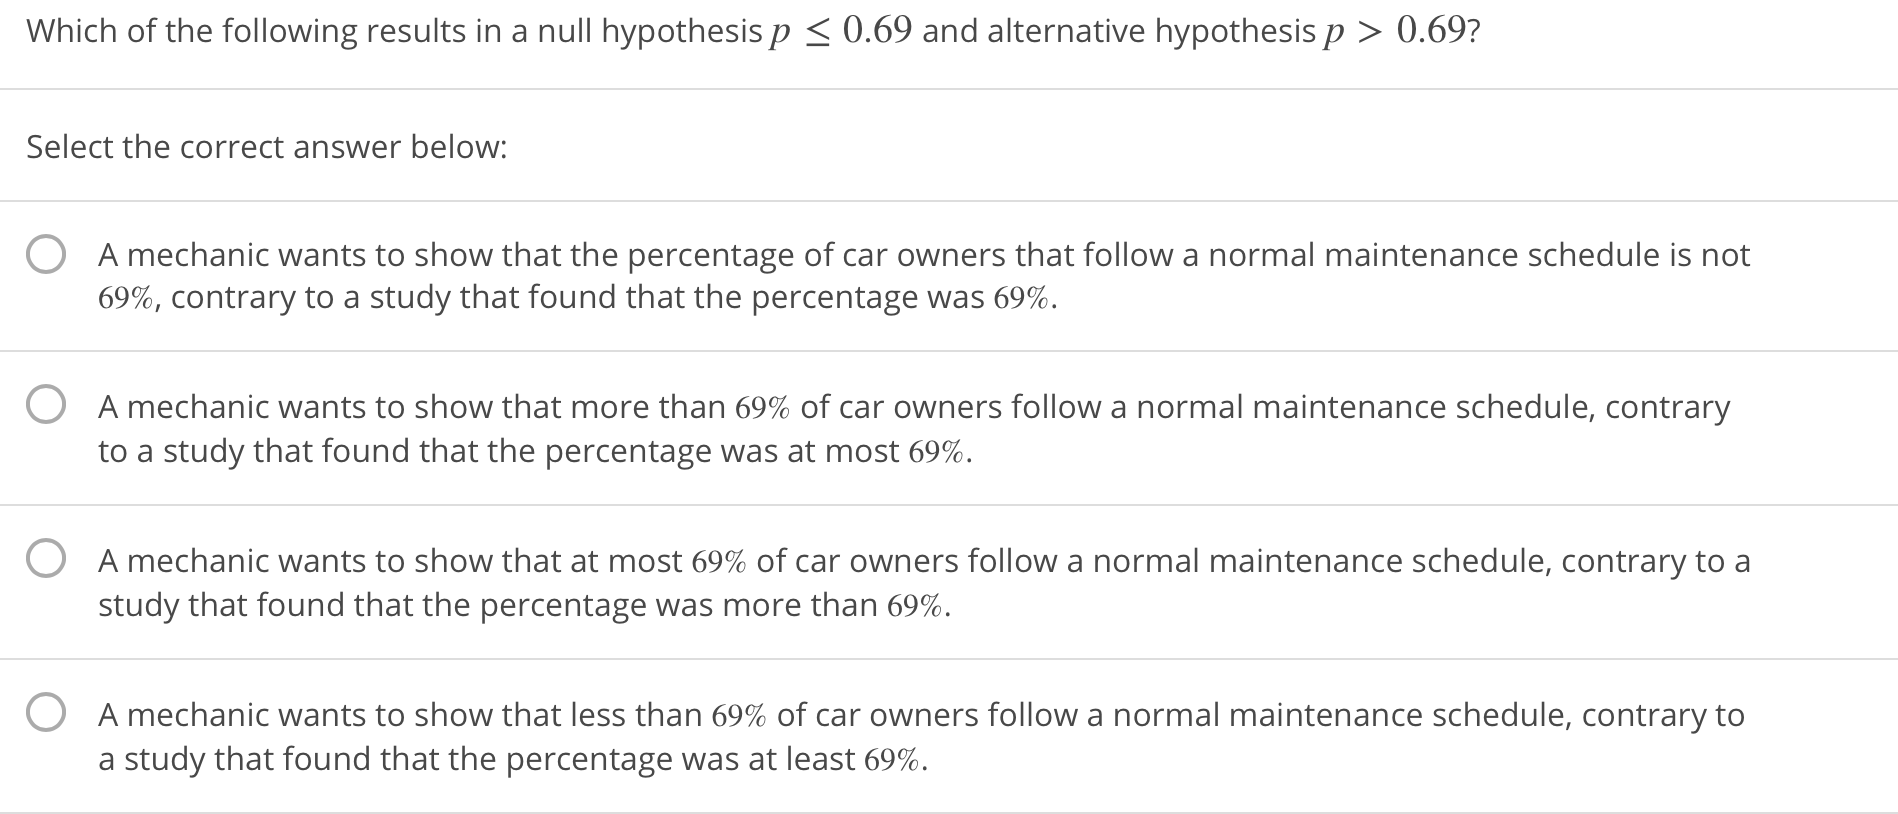 Which of the following results in a null hypothesis p0.69 and alternative hypothesis p >0.69?
Select the correct answer below:
0
A mechanic wants to show that the percentage of car owners that follow a normal maintenance schedule is not
69%, contrary to a study that found that the percentage was 69%.
O
A mechanic wants to show that more than 69% of car owners follow a normal maintenance schedule, contrary
to a study that found that the percentage was at most 69%.
0
A mechanic wants to show that at most 69% of car owners follow a normal maintenance schedule, contrary to a
study that found that the percentage was more than 69%.
0
A mechanic wants to show that less than 69% of car owners follow a normal maintenance schedule, contrary to
a study that found that the percentage was at least 69%.
